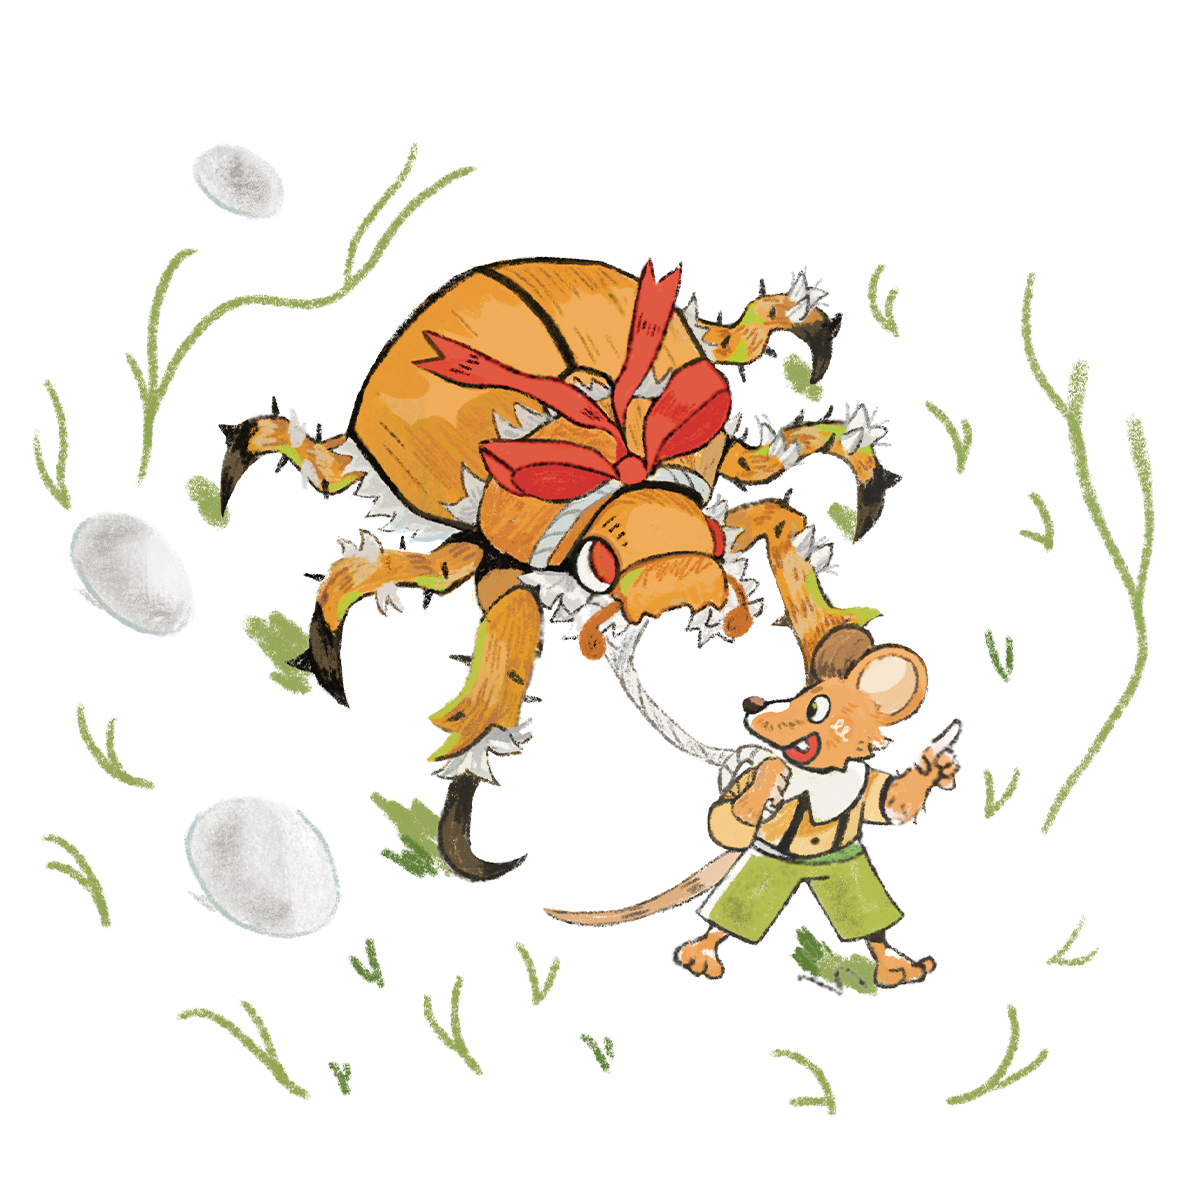 Image. A mouse leading a beetle. The mouse is smaller than the beetle, and the beetle is wearing a red bow.